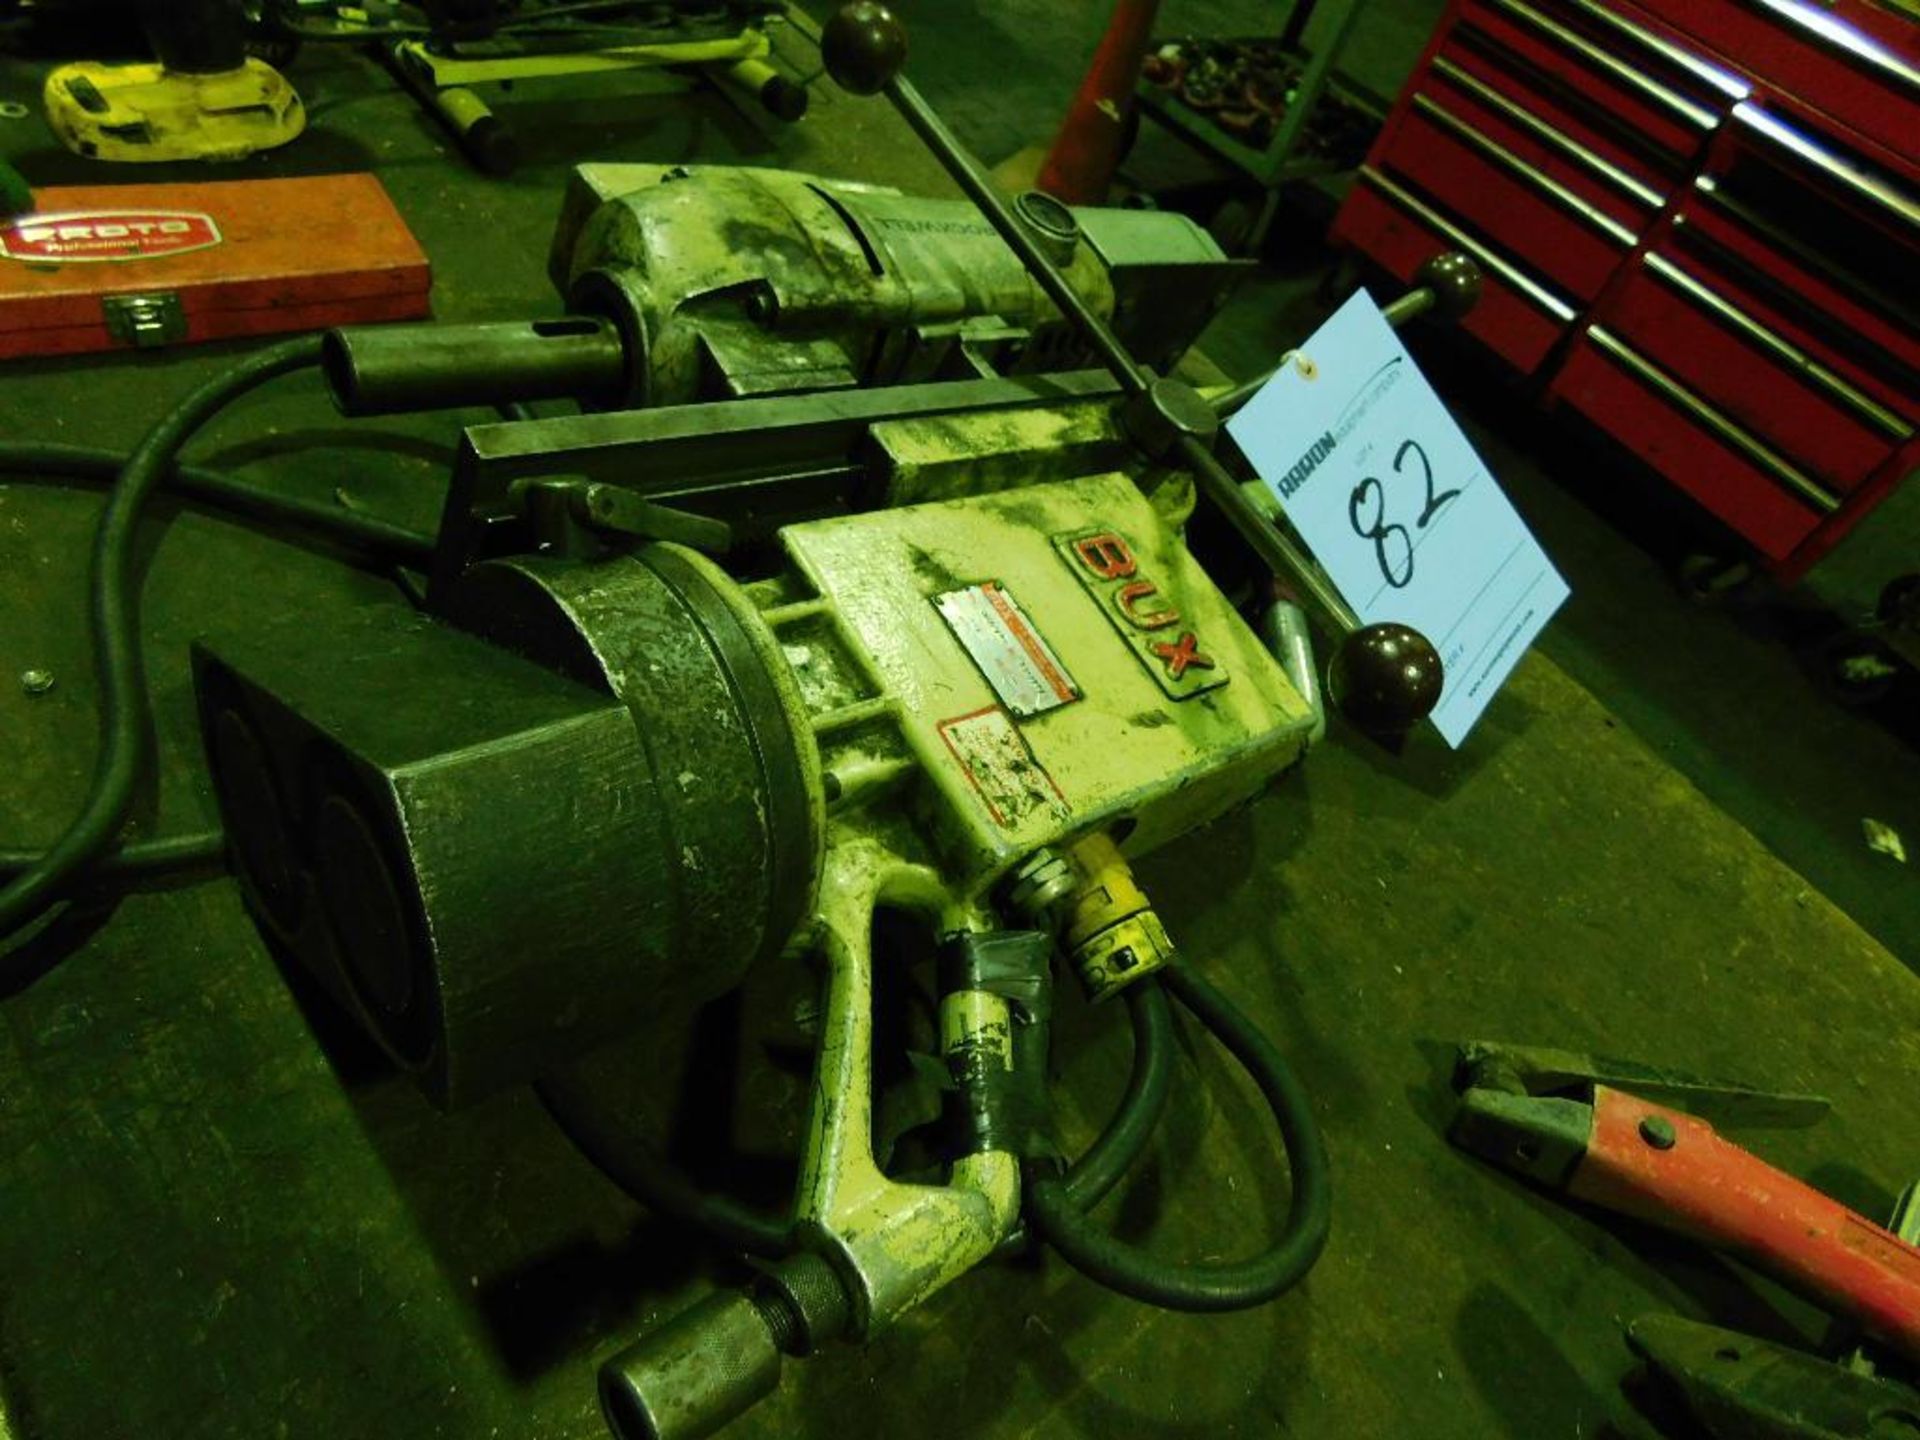 Bux magnetic drill, model DH3/4RP.